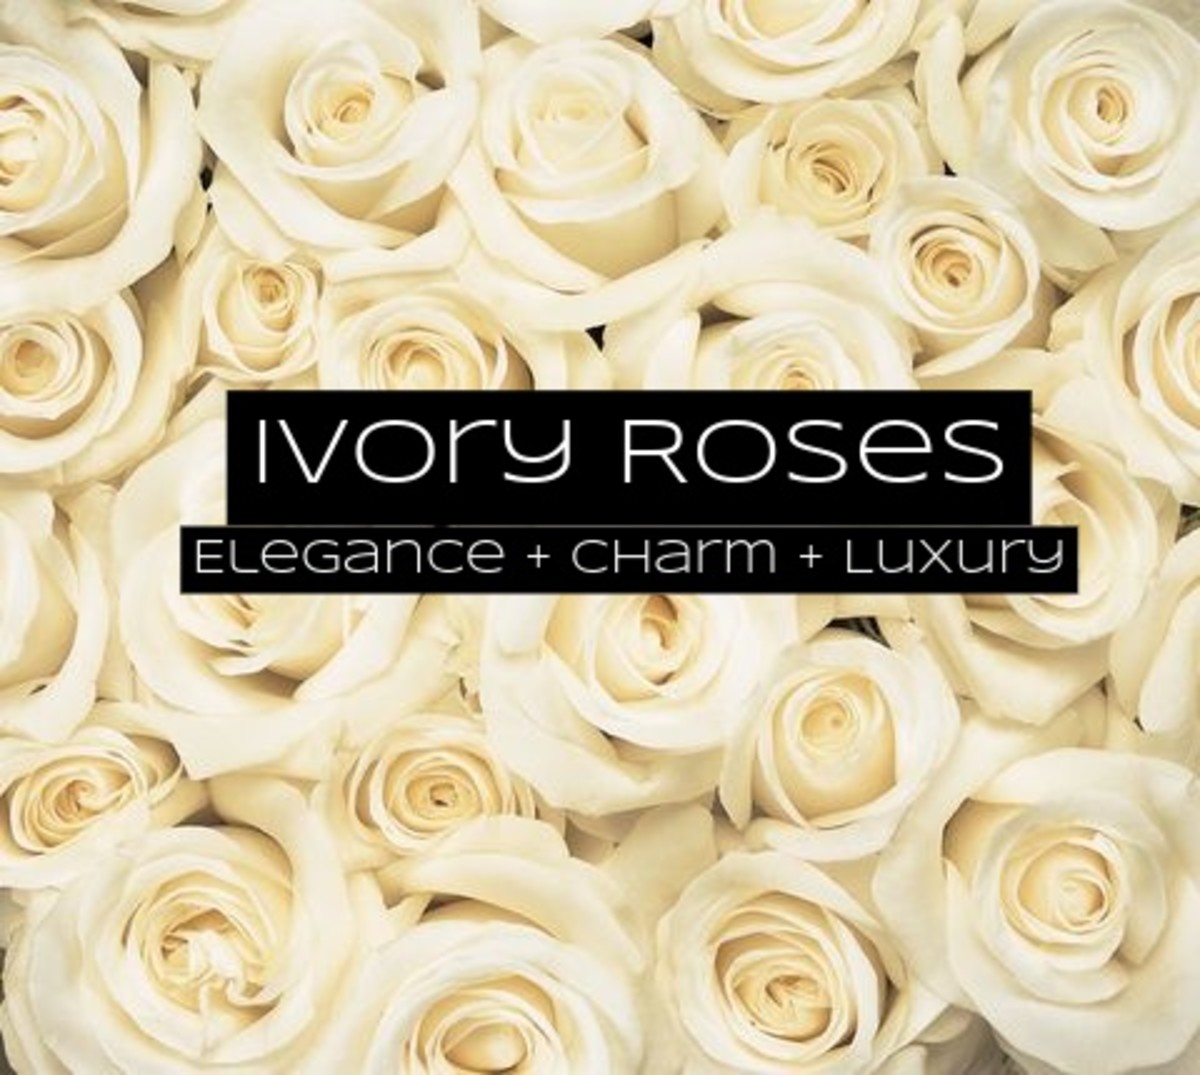 Ivory roses are for elegance, beauty, and luxury. They're great at posh parties.